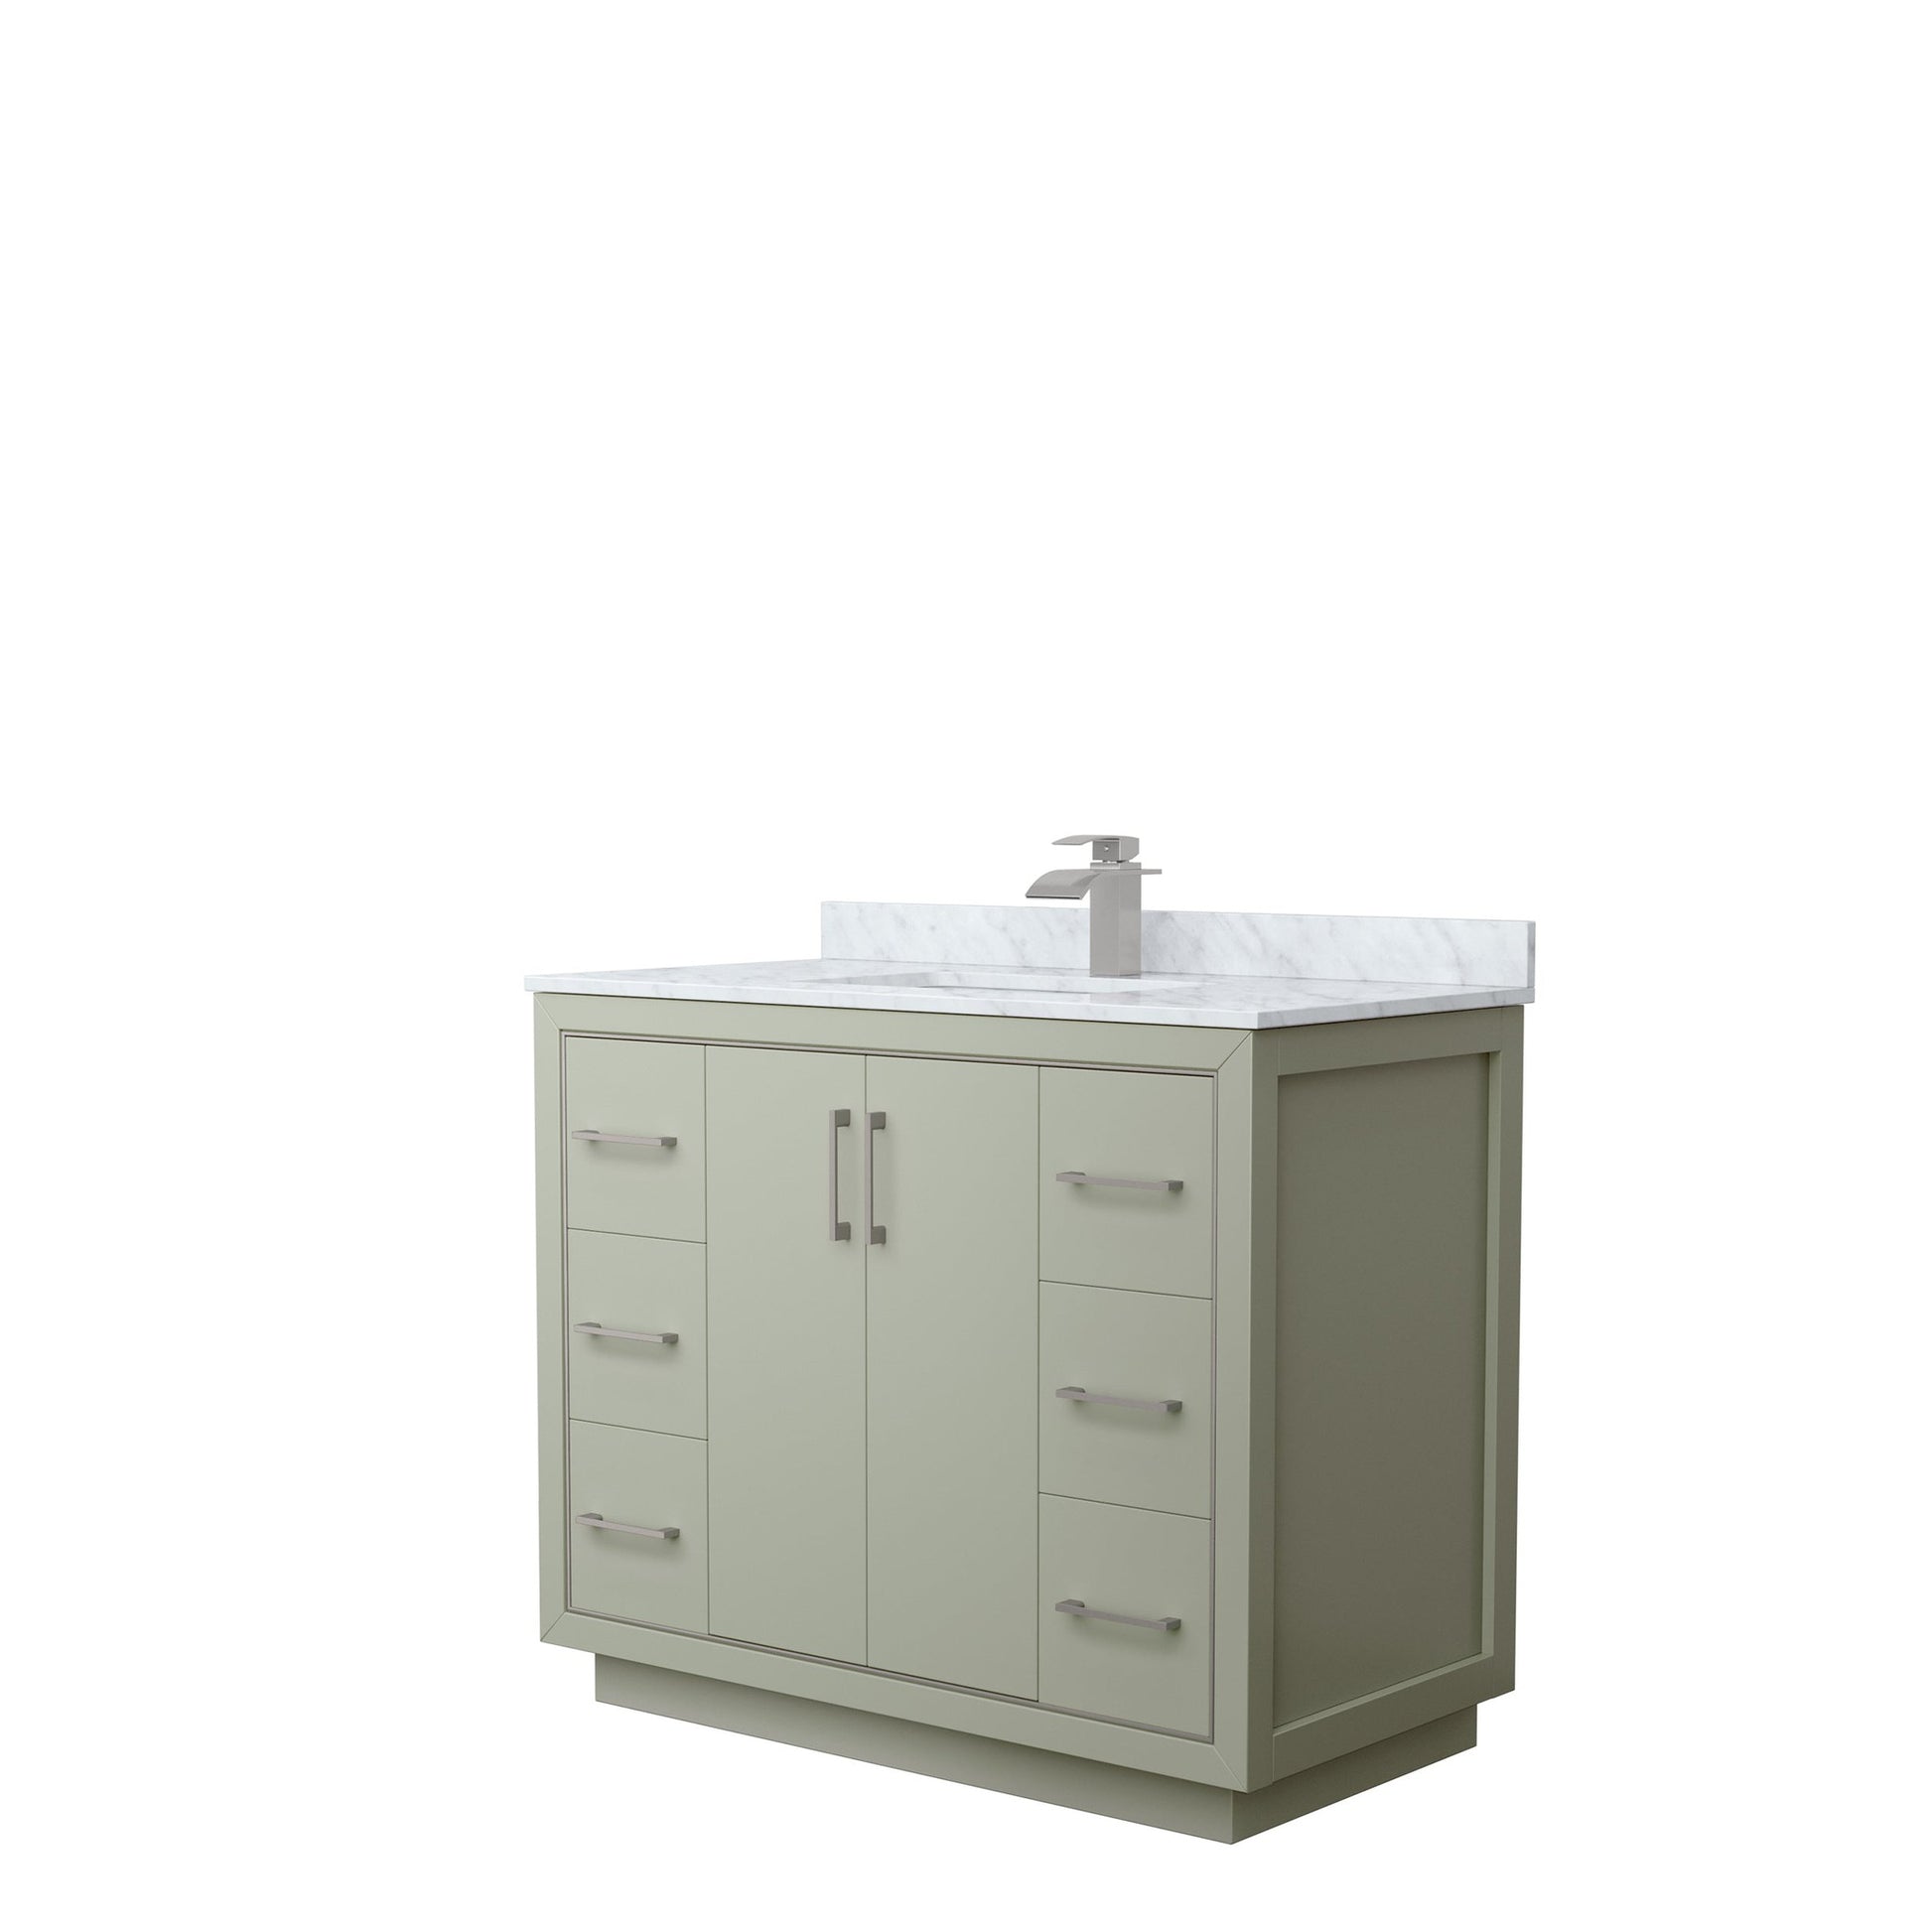 Wyndham Collection Icon 42" Single Bathroom Vanity in Light Green, White Carrara Marble Countertop, Undermount Square Sink, Brushed Nickel Trim